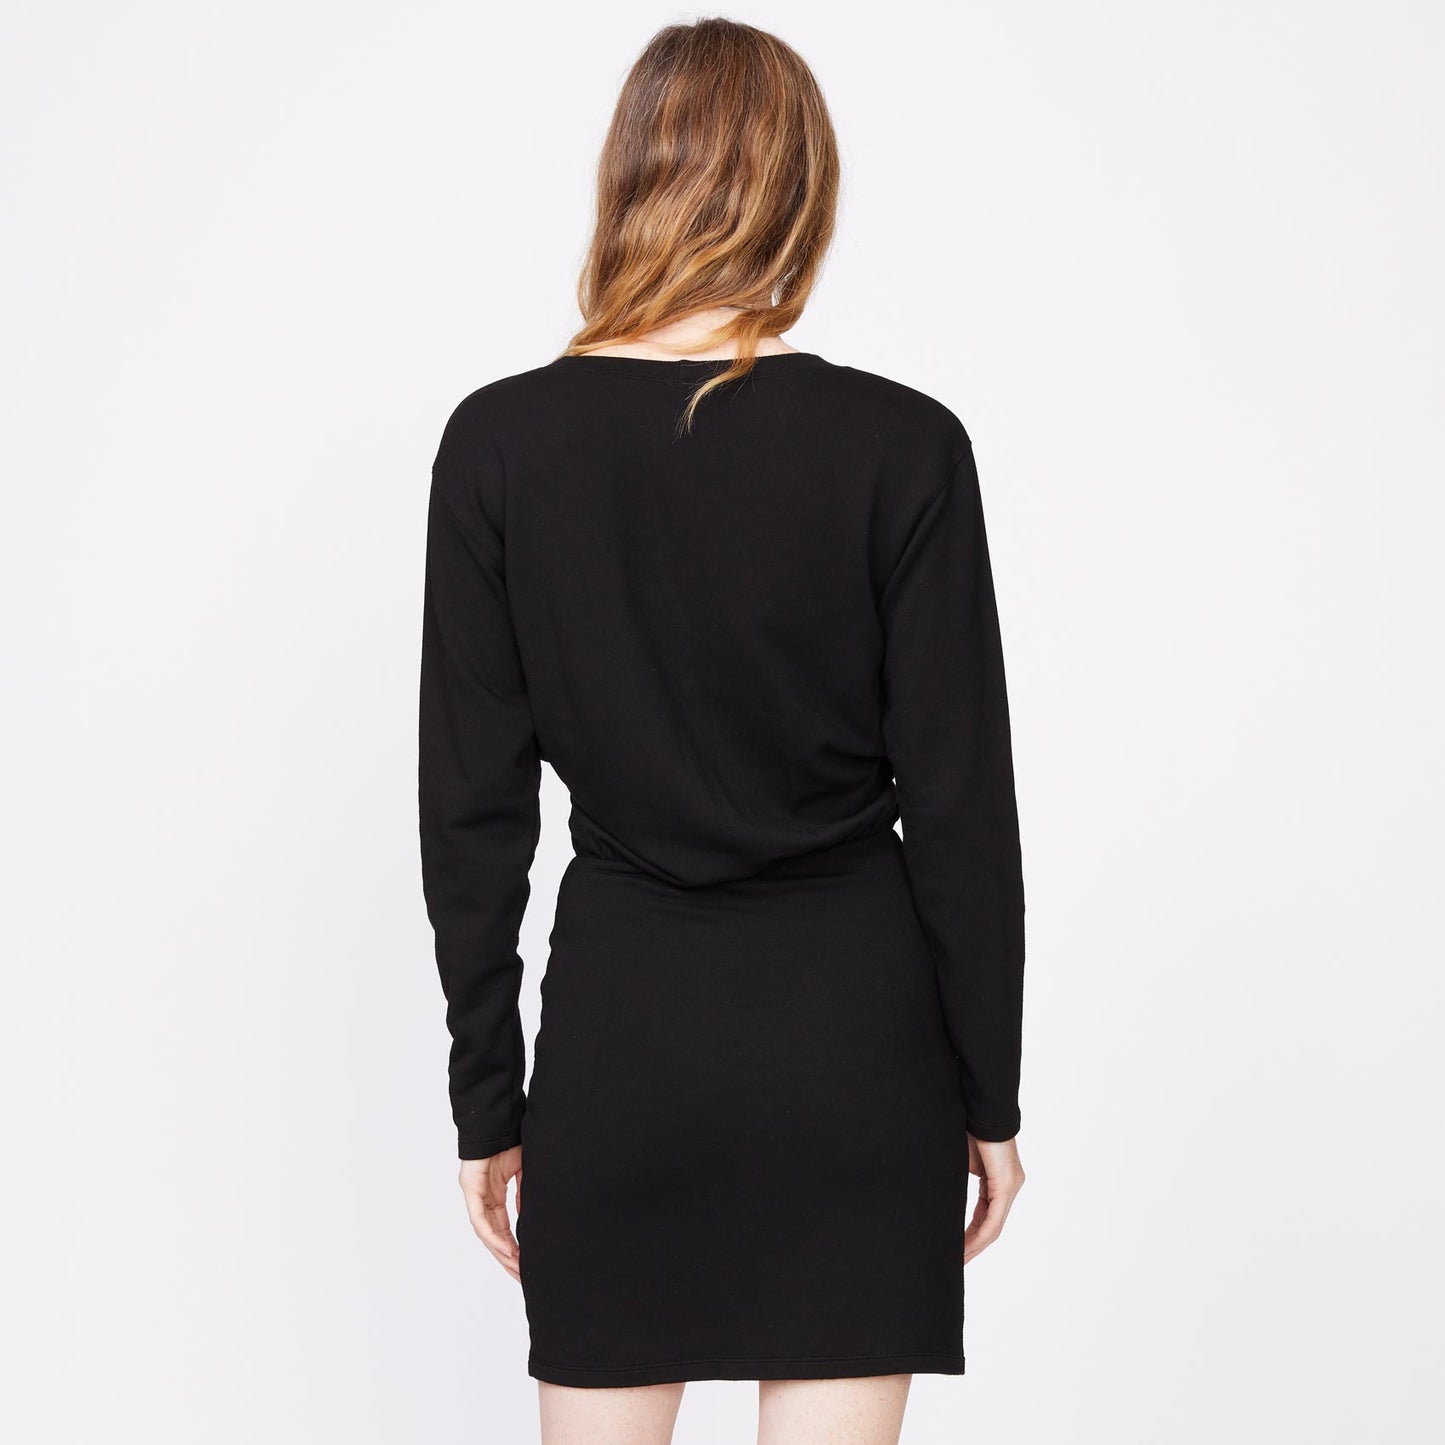 Back view of model wearing the supersoft fleece crossover v dress in black.